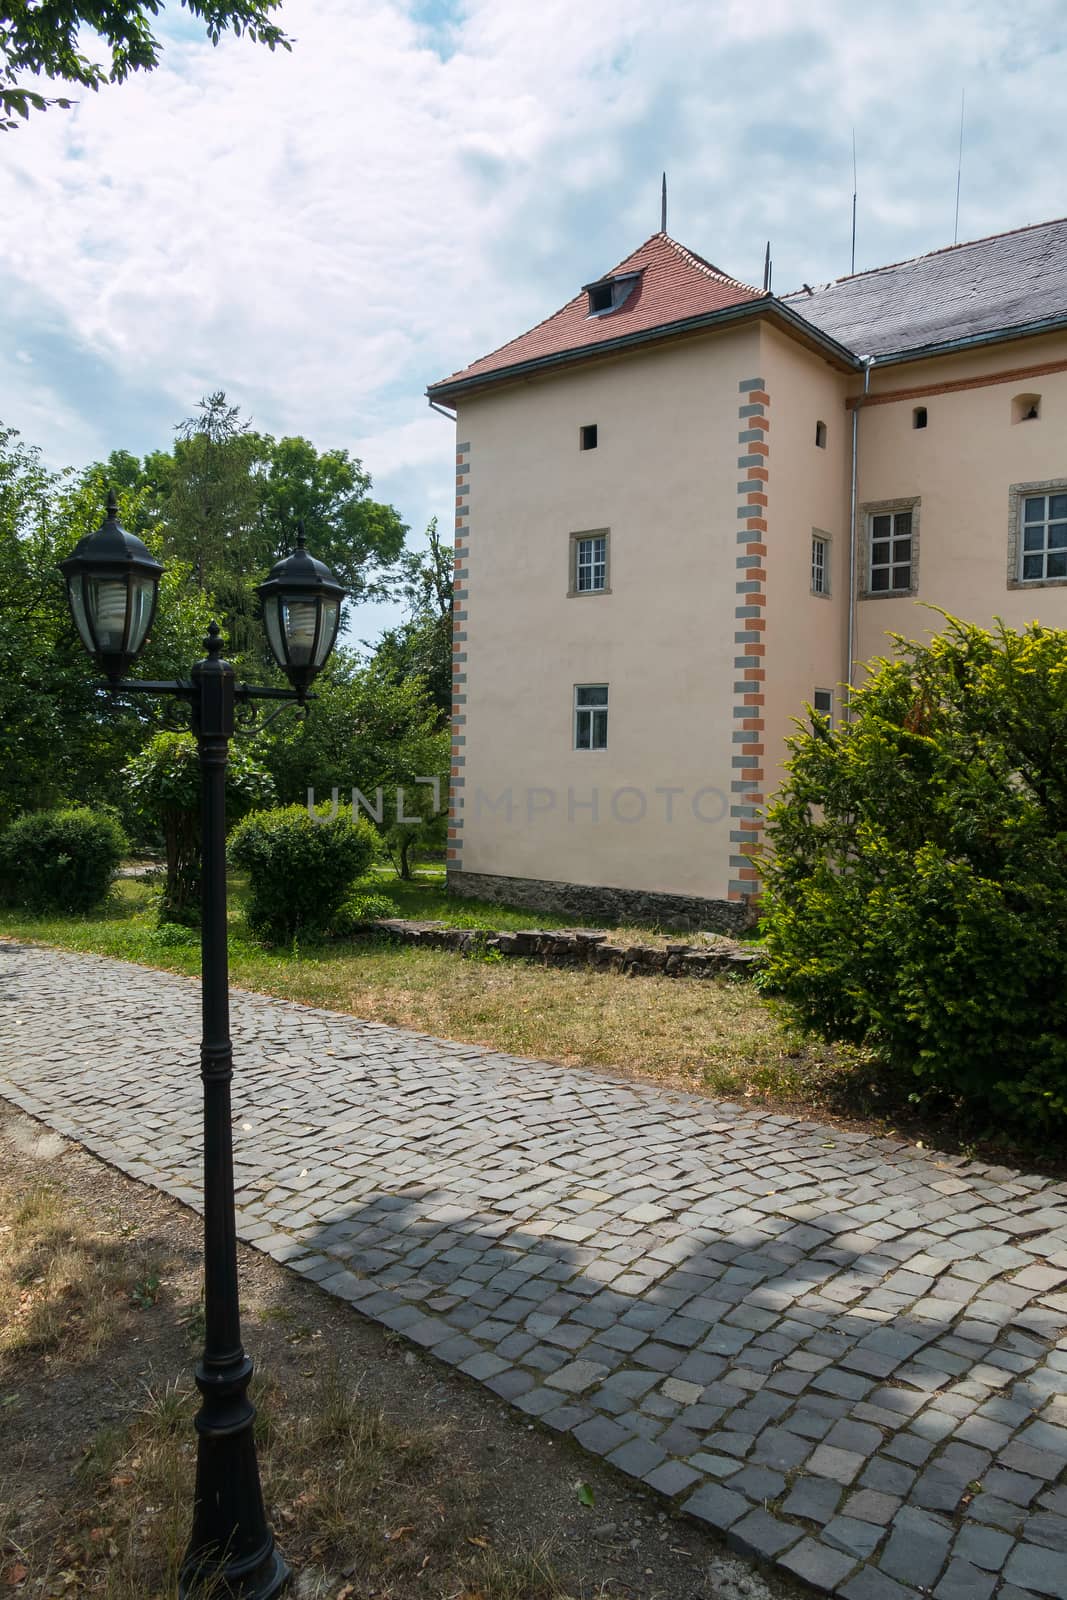 A neat lantern with two lamps standing near a path paved with a stone walking near a beautiful building. by Adamchuk